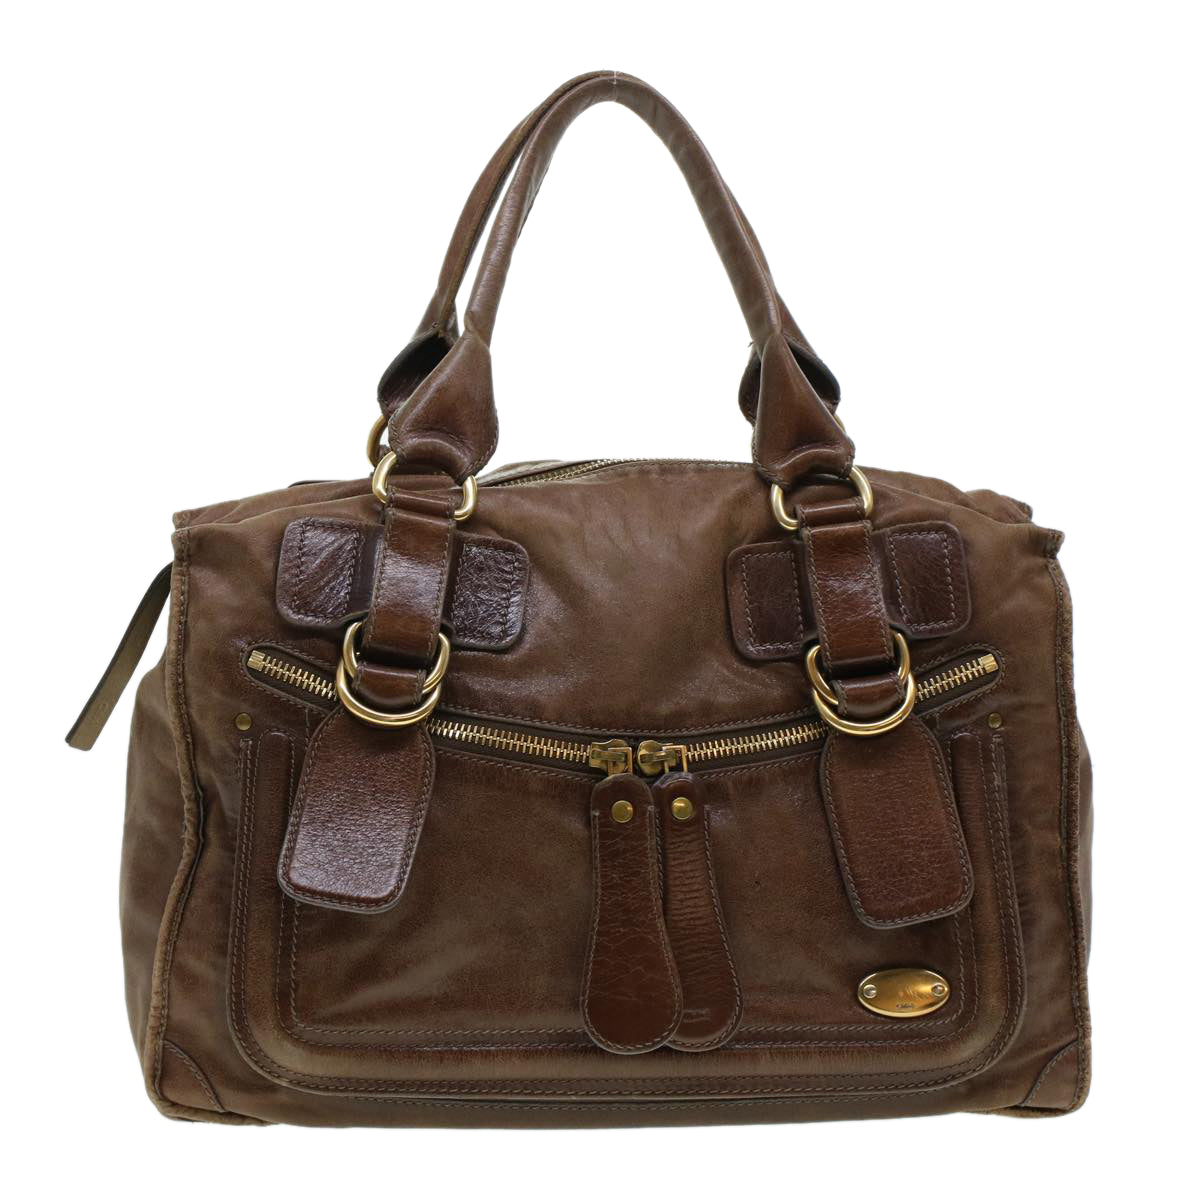 Chloe Tote Bag Leather Brown Auth bs5947